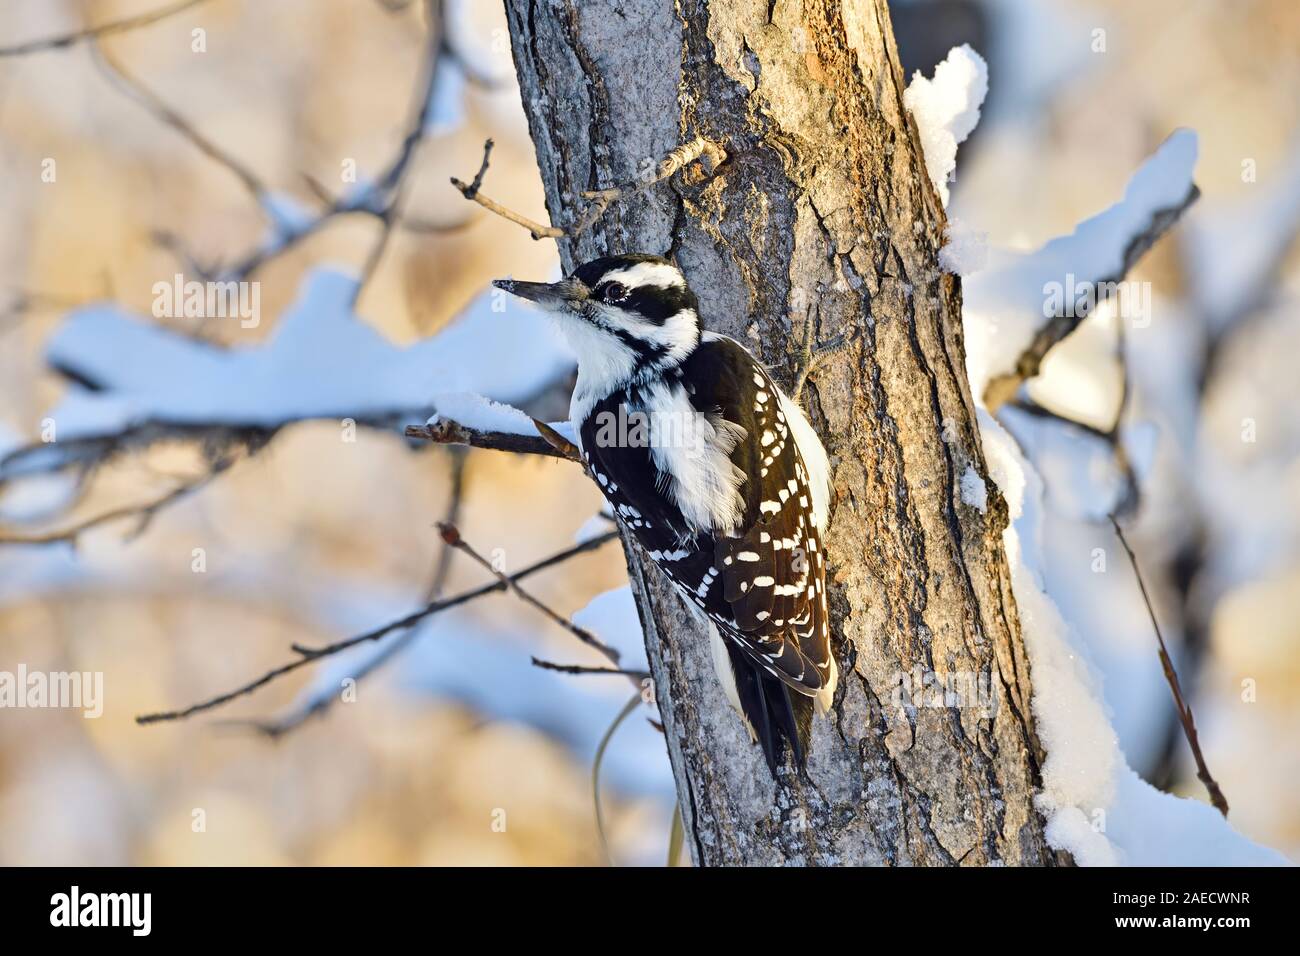 A wild Hairy Woodpecker 'Picoides pubescens', climbing up the outside bark of a tree trunk in search of insects  in rural Alberta Canada, Stock Photo